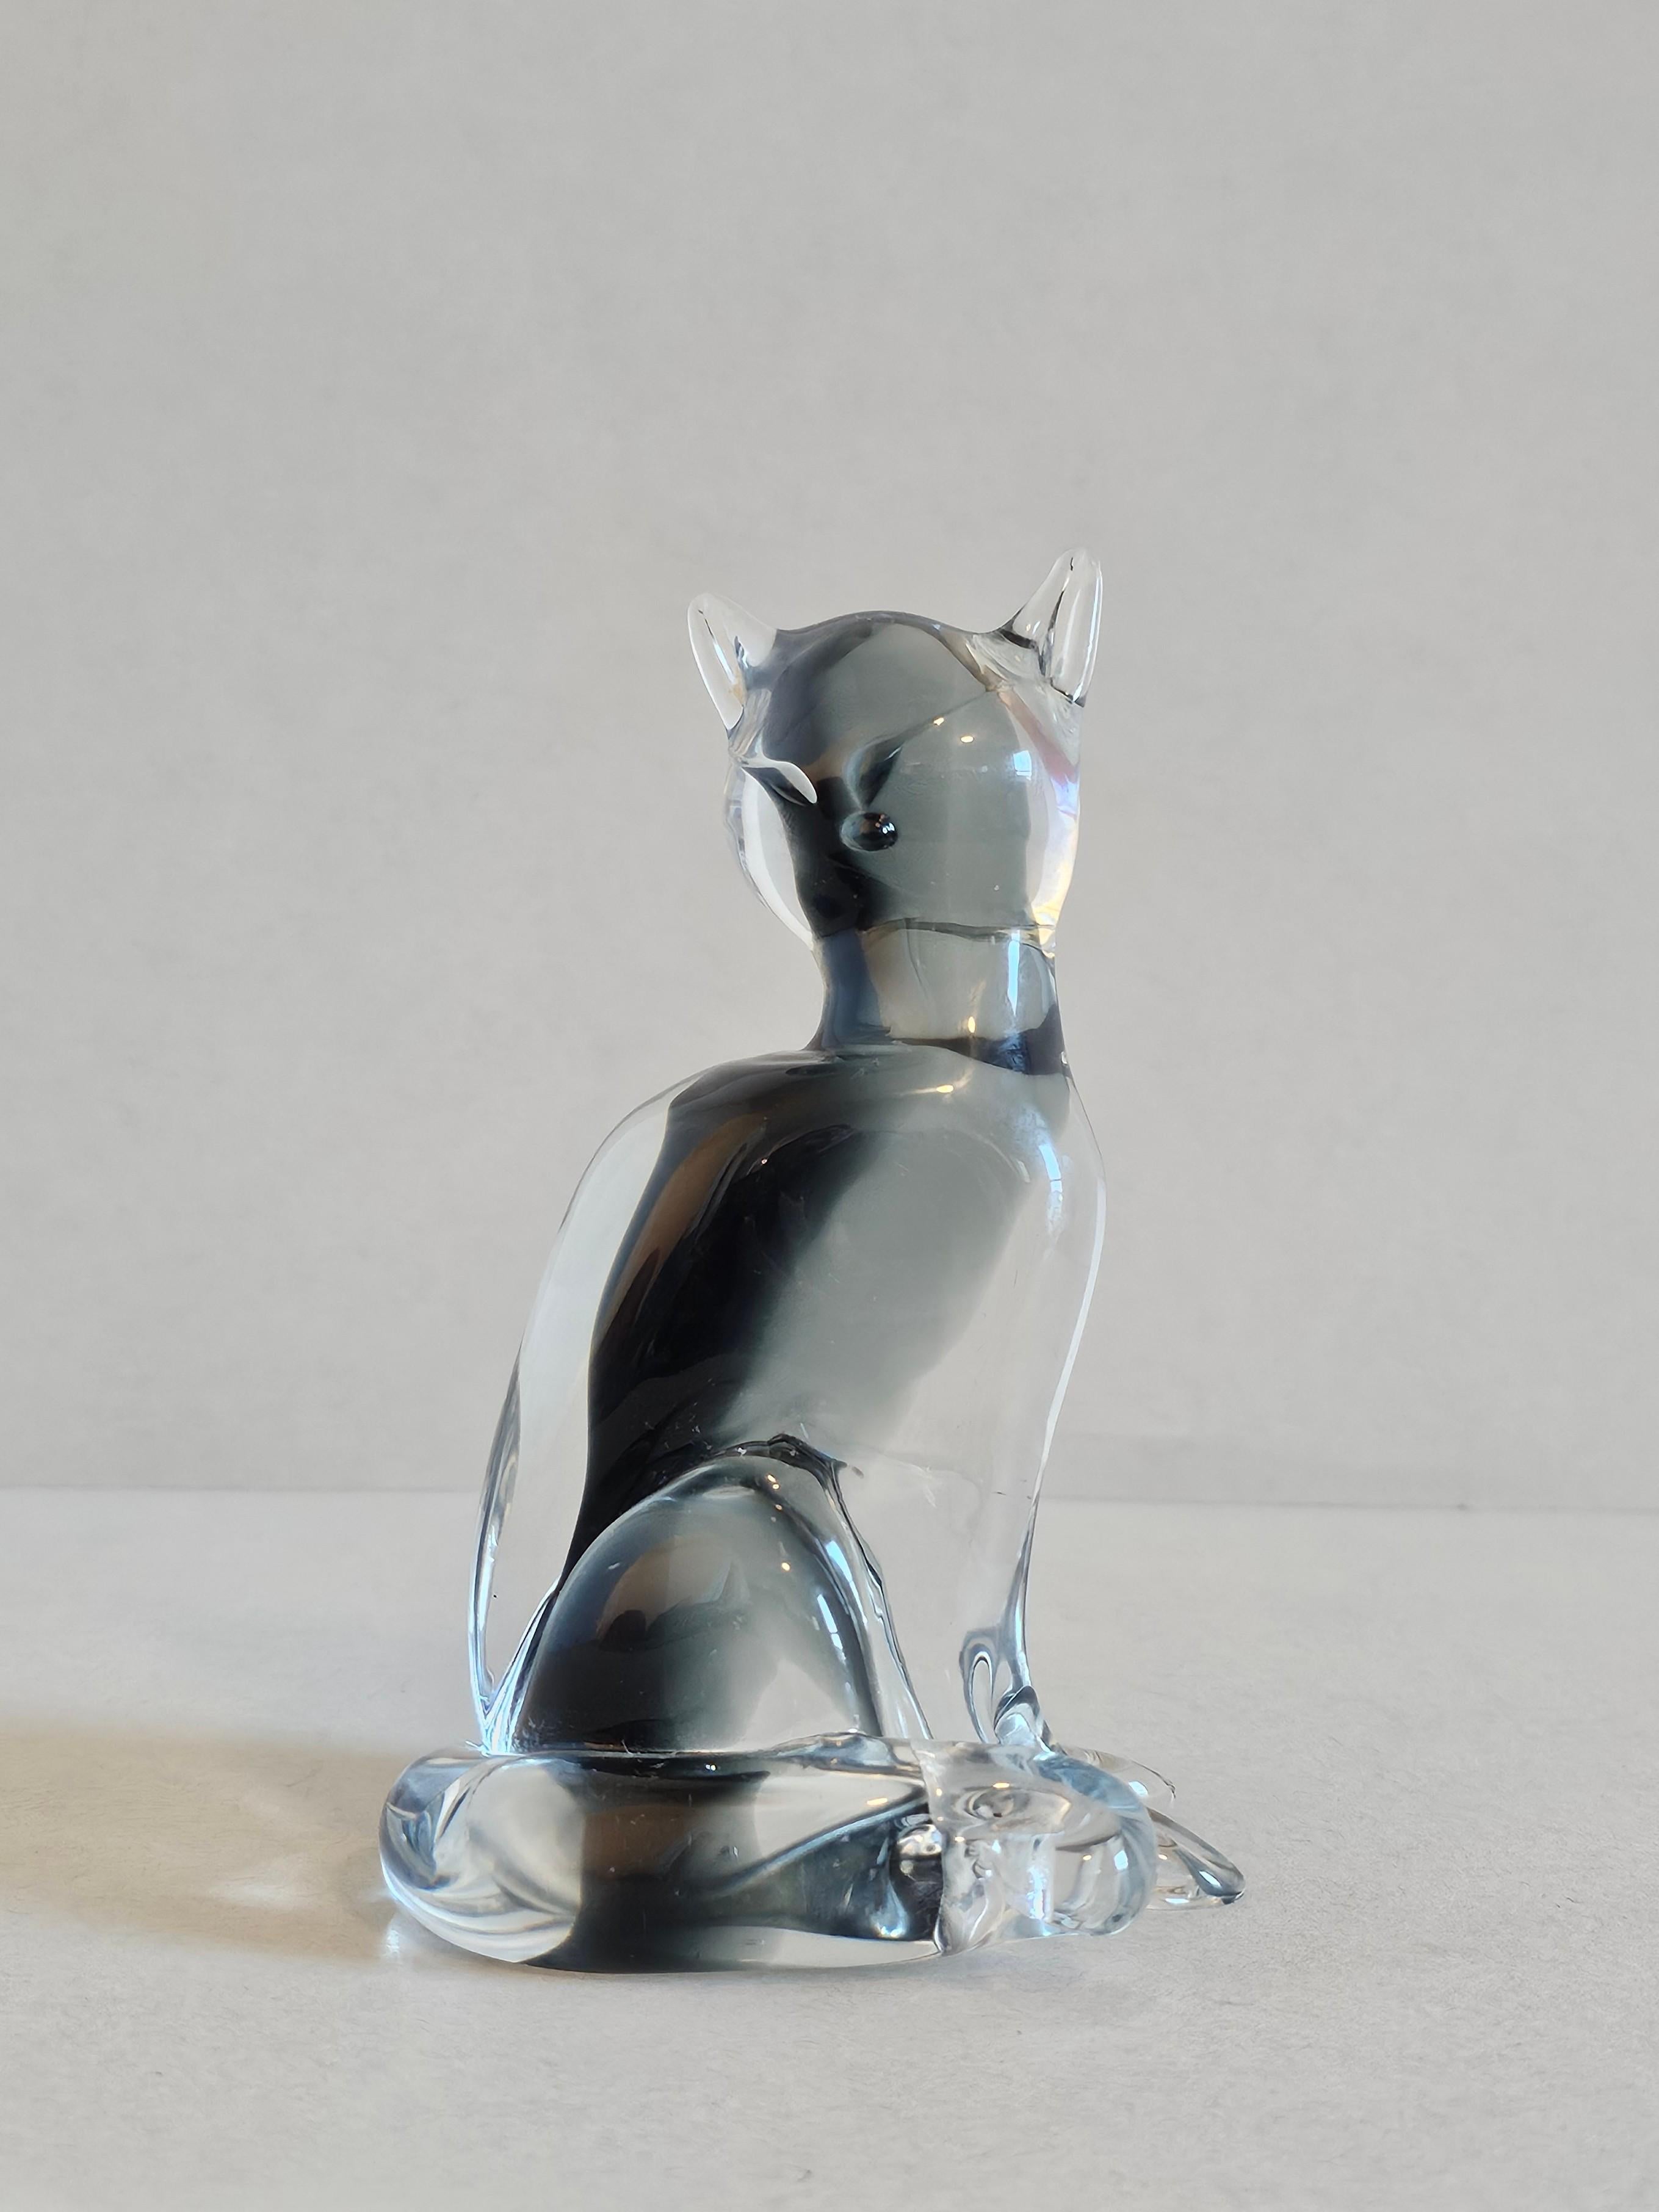 A fine avant-garde Murano art glass cat figurine sculpture attributed to Carlo Moretti. 

Handmade in Venice, Italy, in the late 20th 
century, mid-century modern style, figural feline form, clear mouth-blown glass with smokey vitreous paste